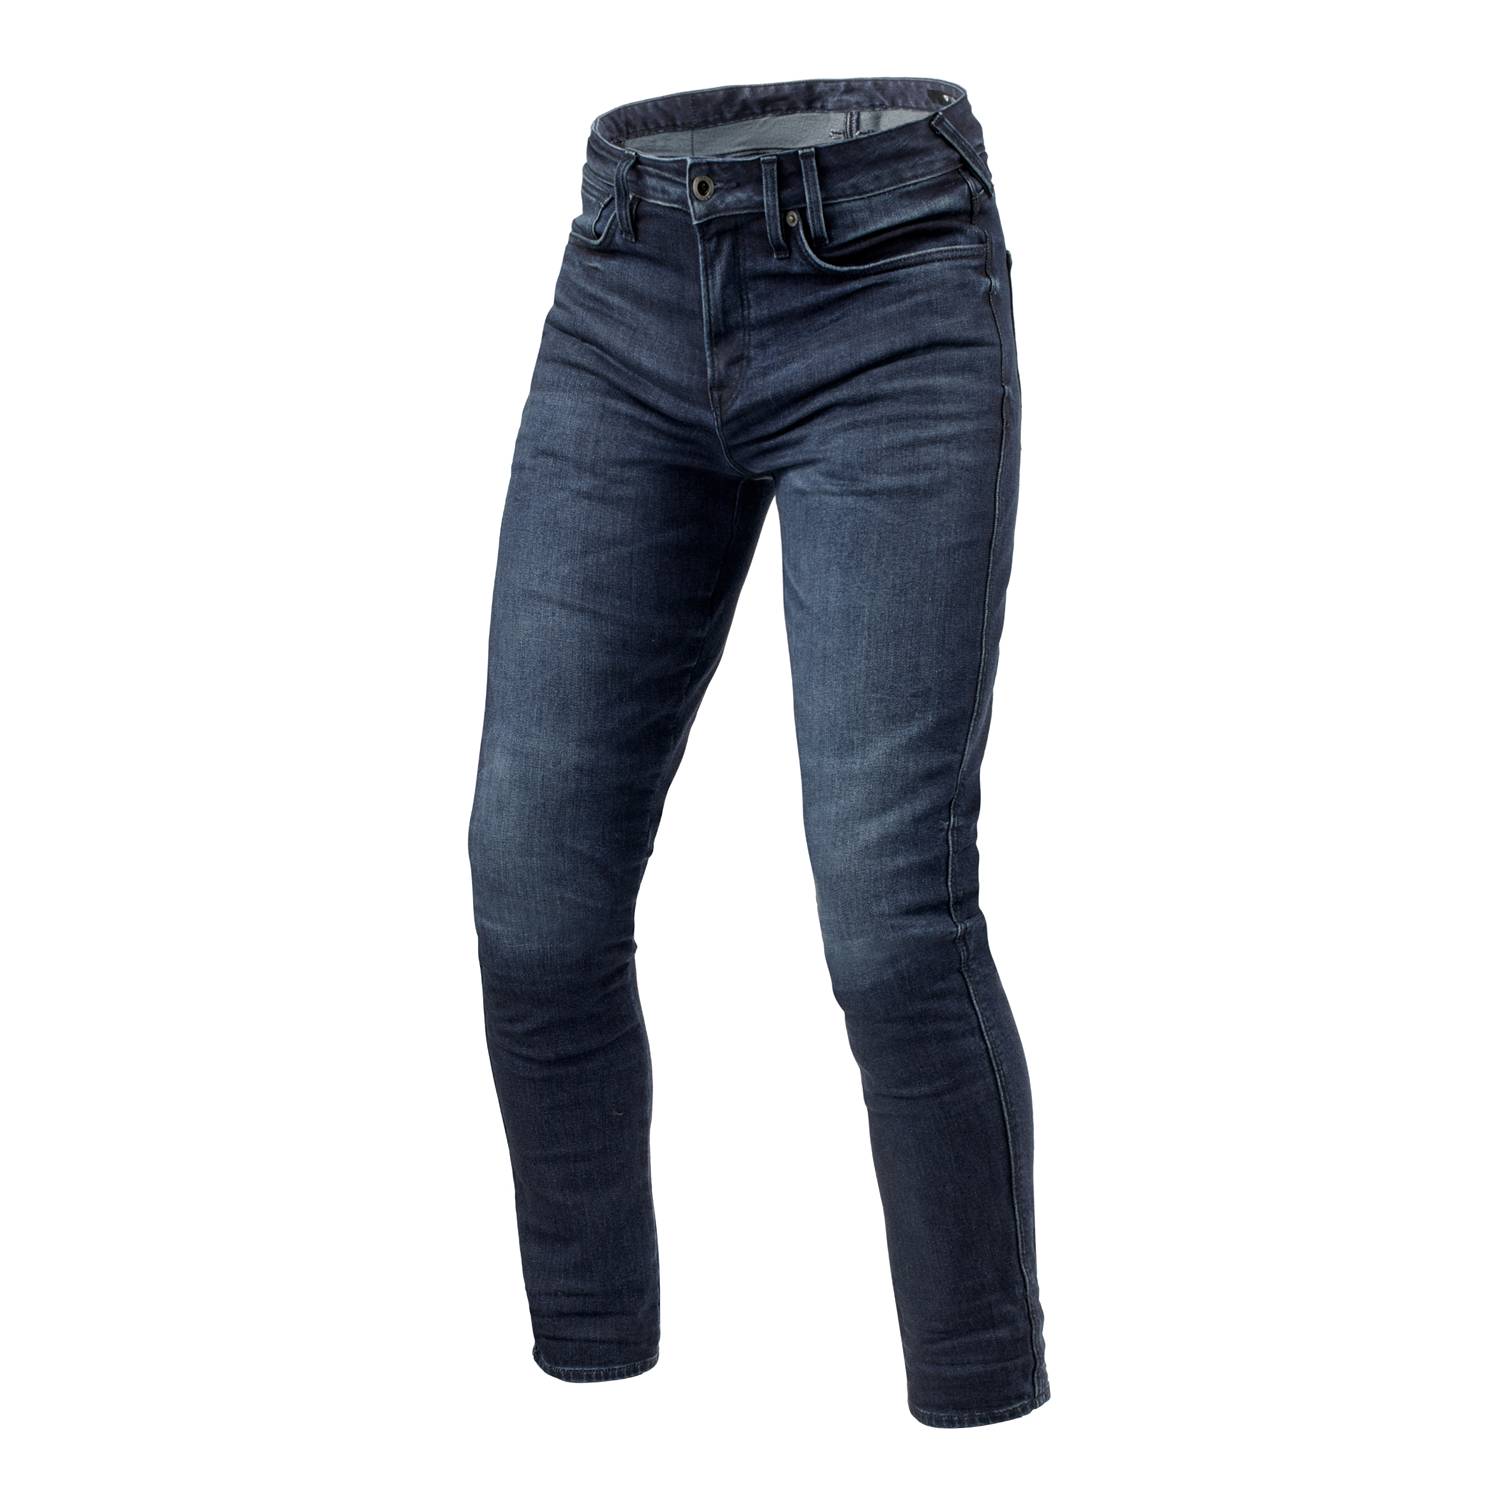 Image of REV'IT! Jeans Carlin SK Dark Blue Used L36 Motorcycle Jeans Size L36/W31 ID 8700001376532